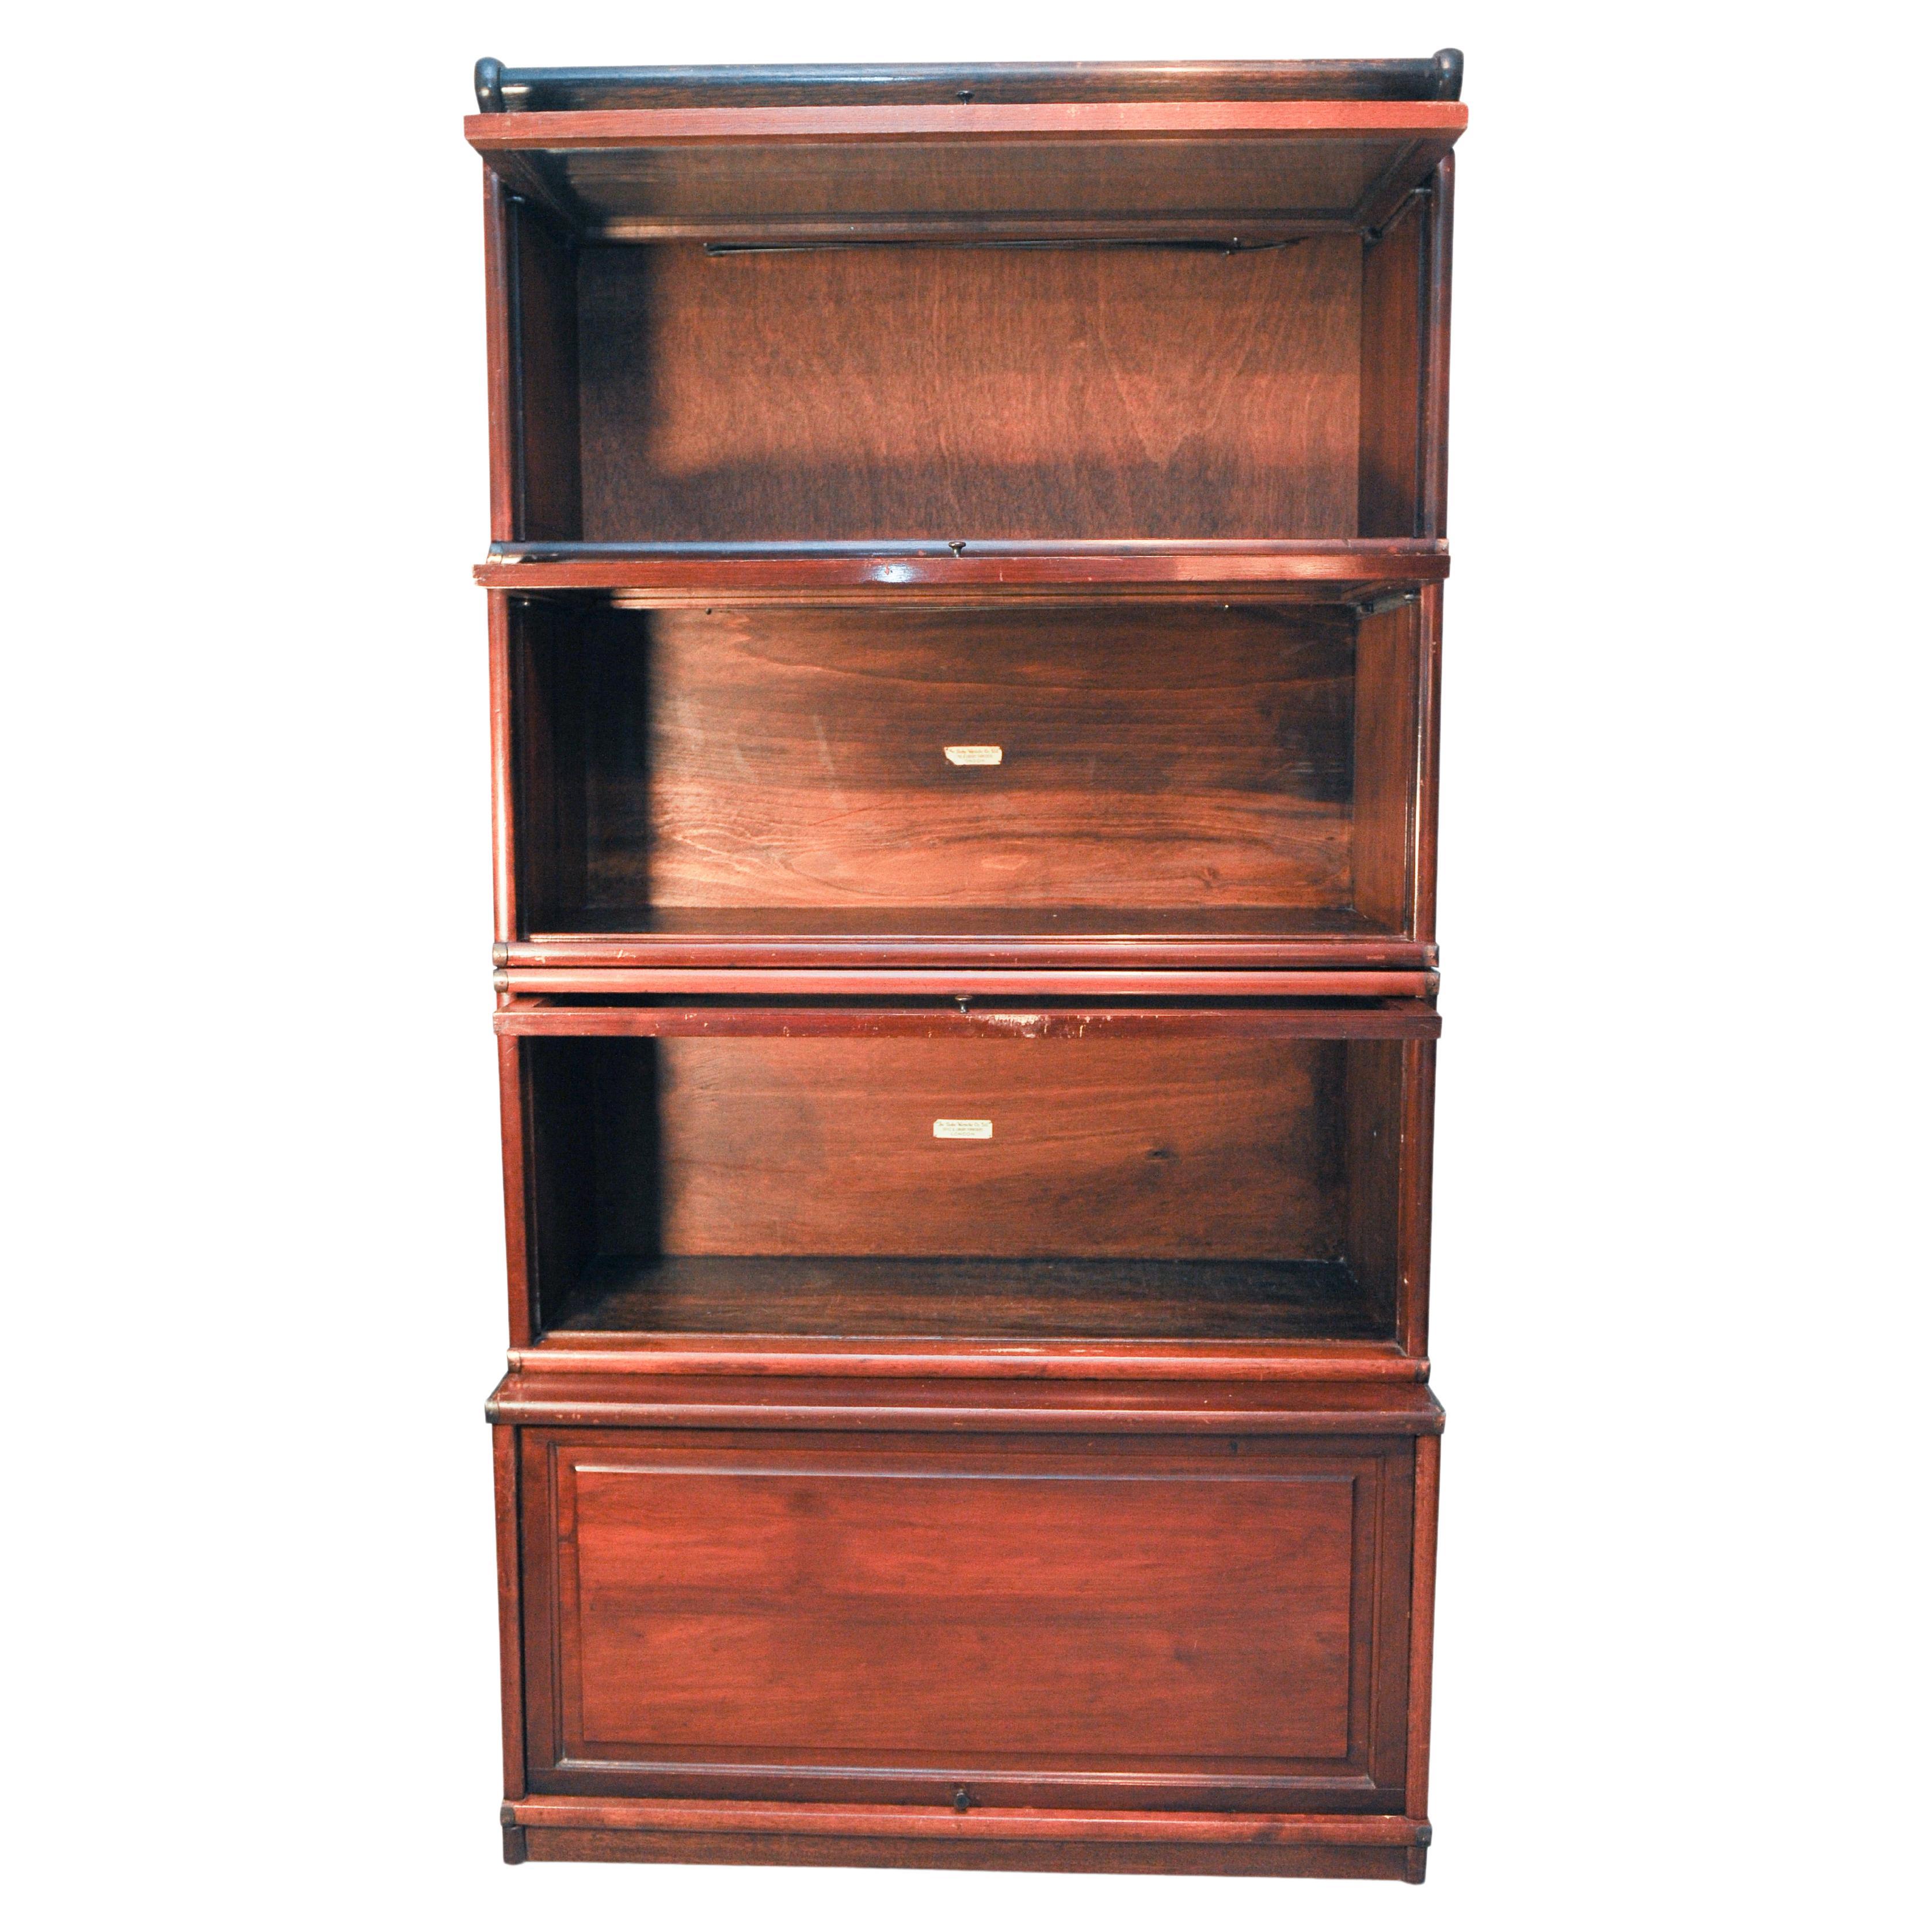 Globe Wernicke four tier glazed sectional / modular / barrister's bookcase 1920s

Comes apart in sections for easy transportation.

With original ivorine Globe-Wernicke Co of London logos.

Globe-Wernicke was formed as a result of the